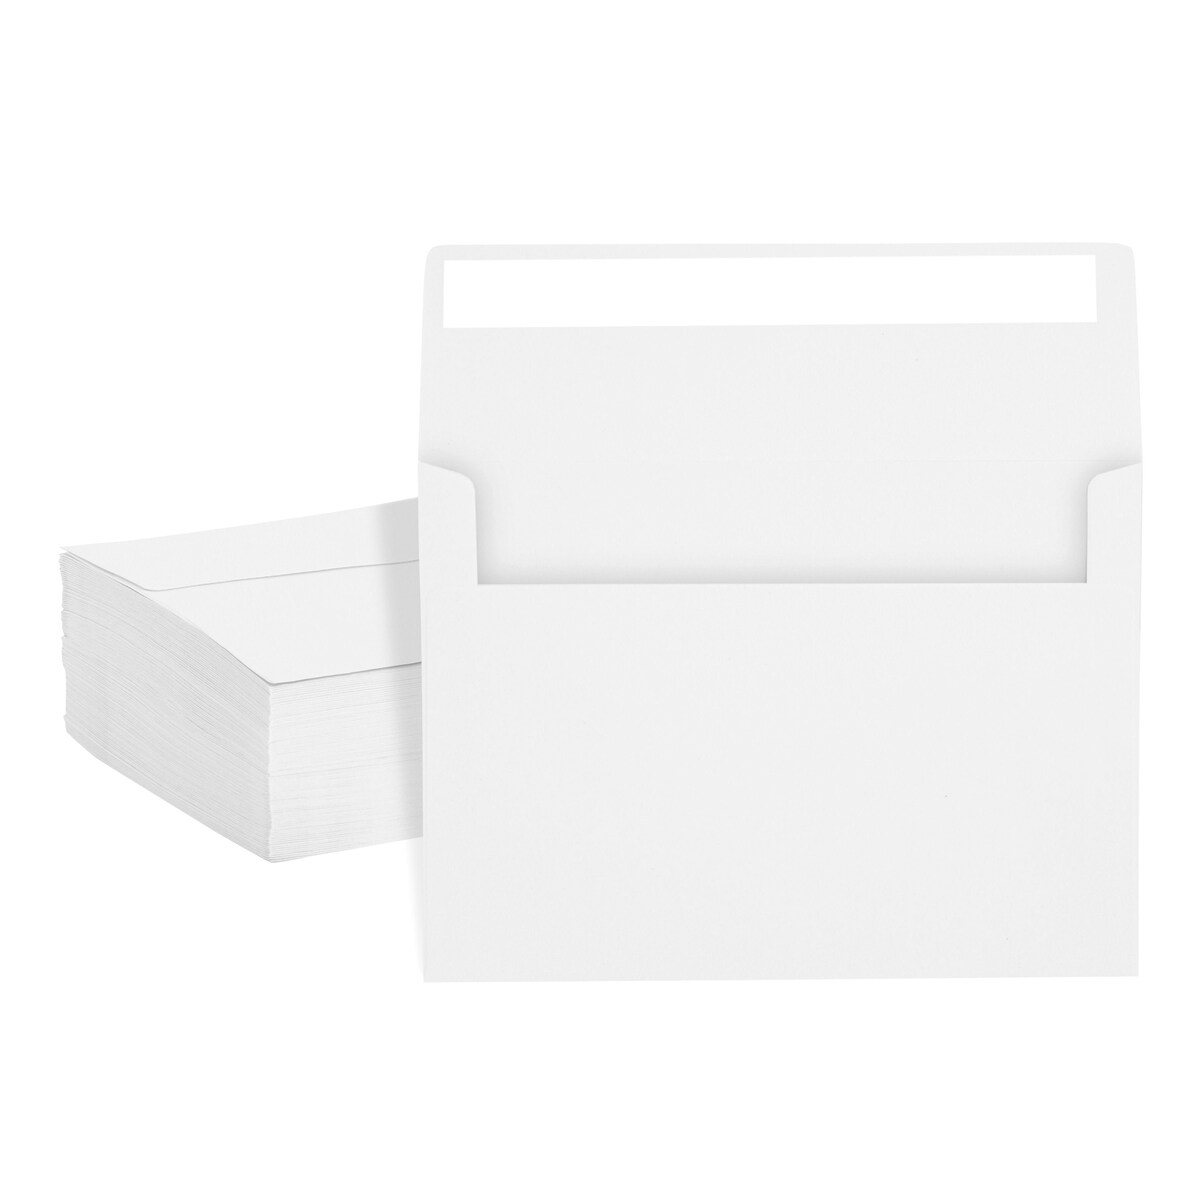 100-Pack A7 Envelopes for 5x7 Greeting Cards & Invitation, Square Flap,  Bright White, 5.25 x 7.25 inches